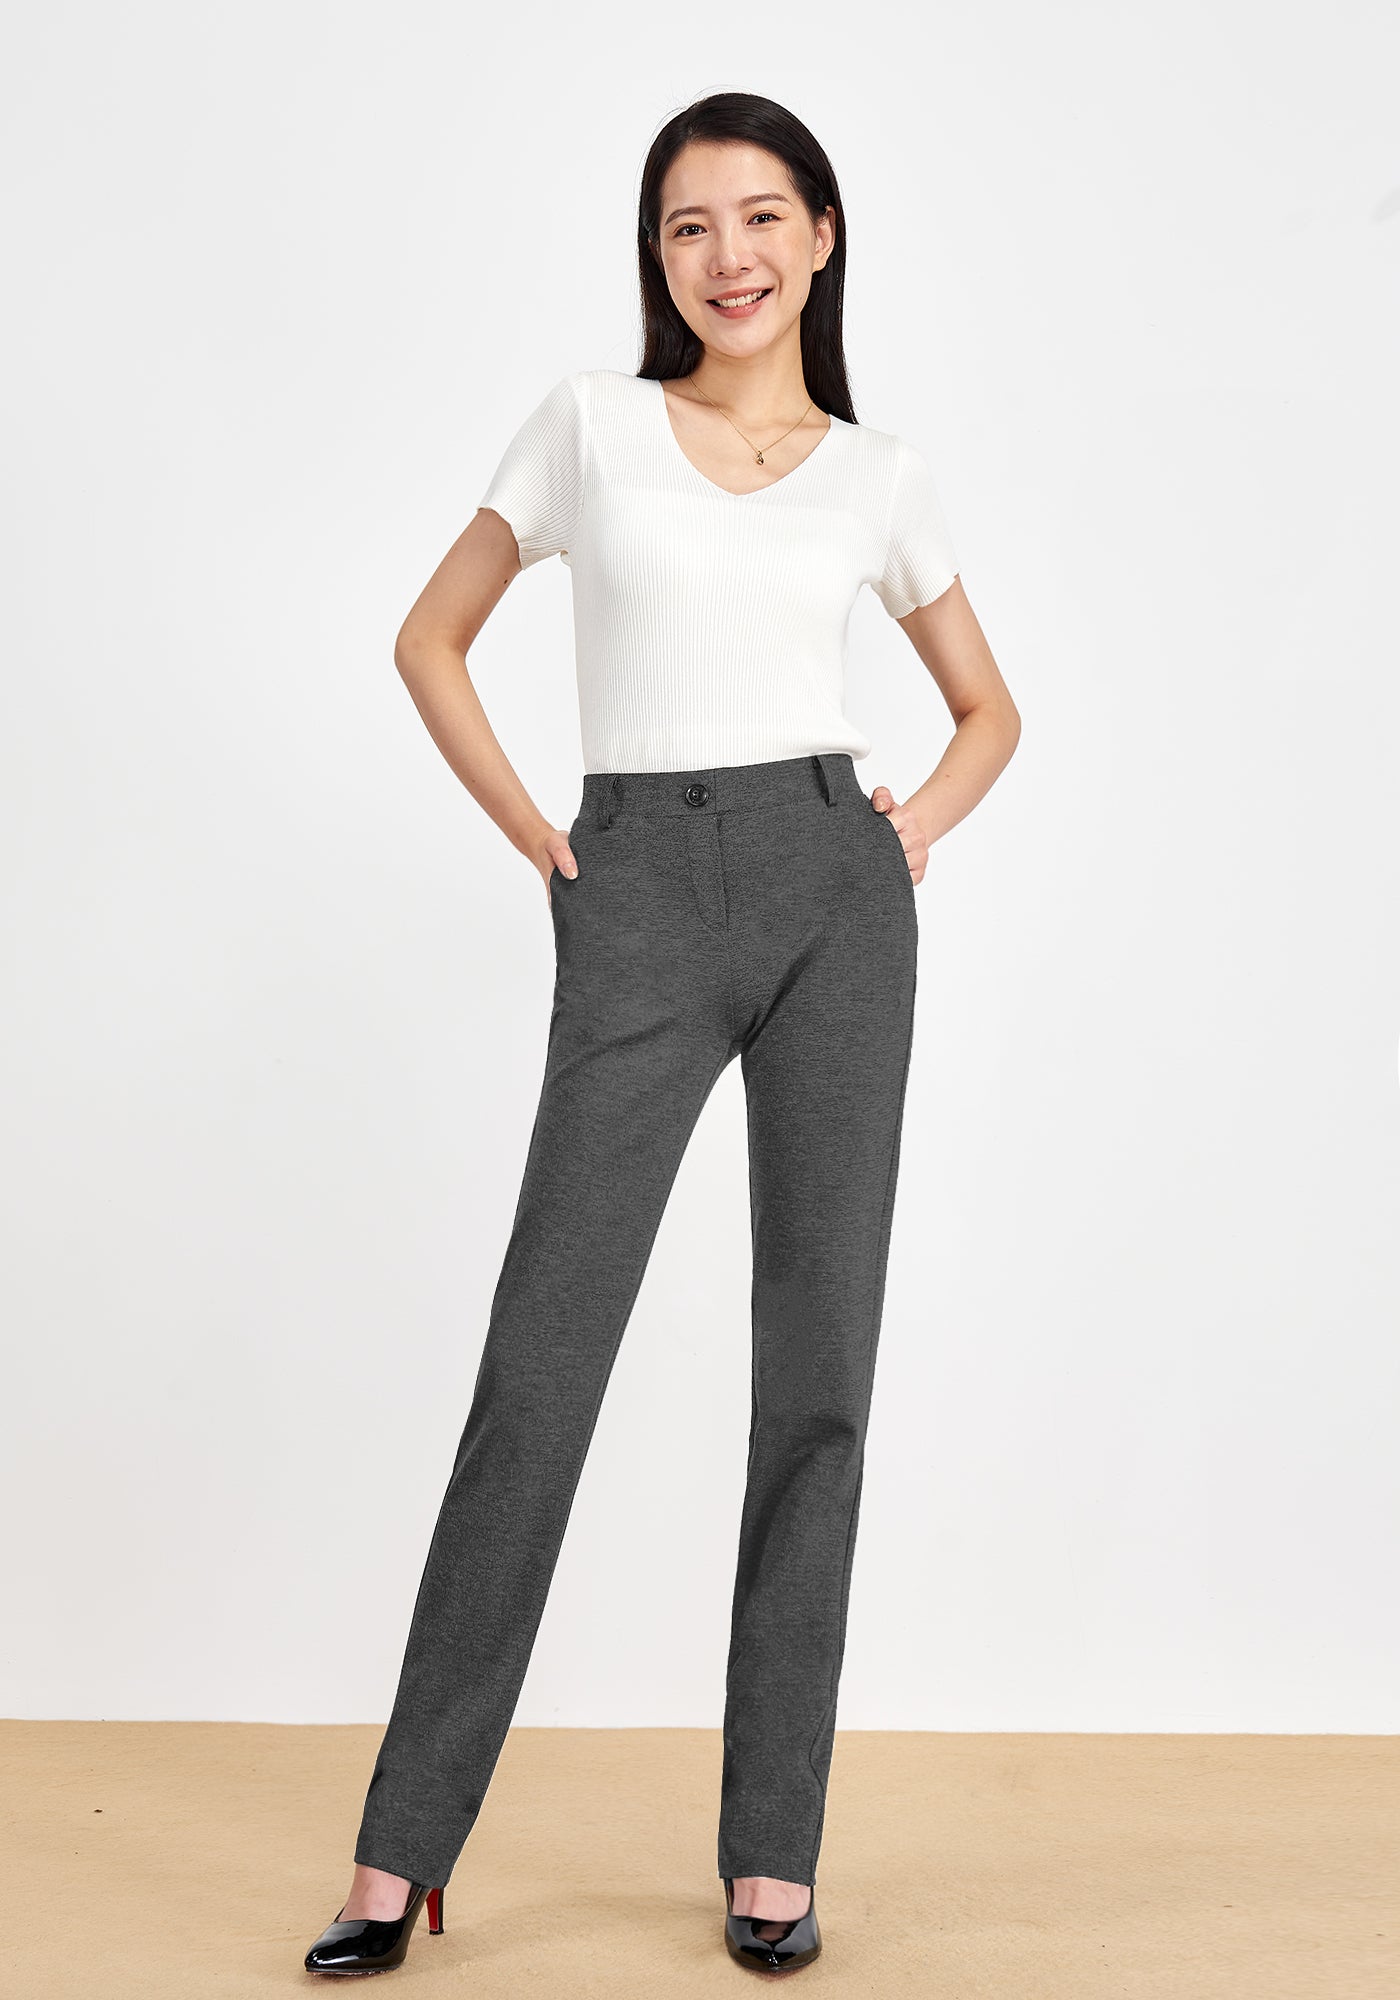 Try On Haul- Tapata Dress Pants- Summer Dresses, Tops and